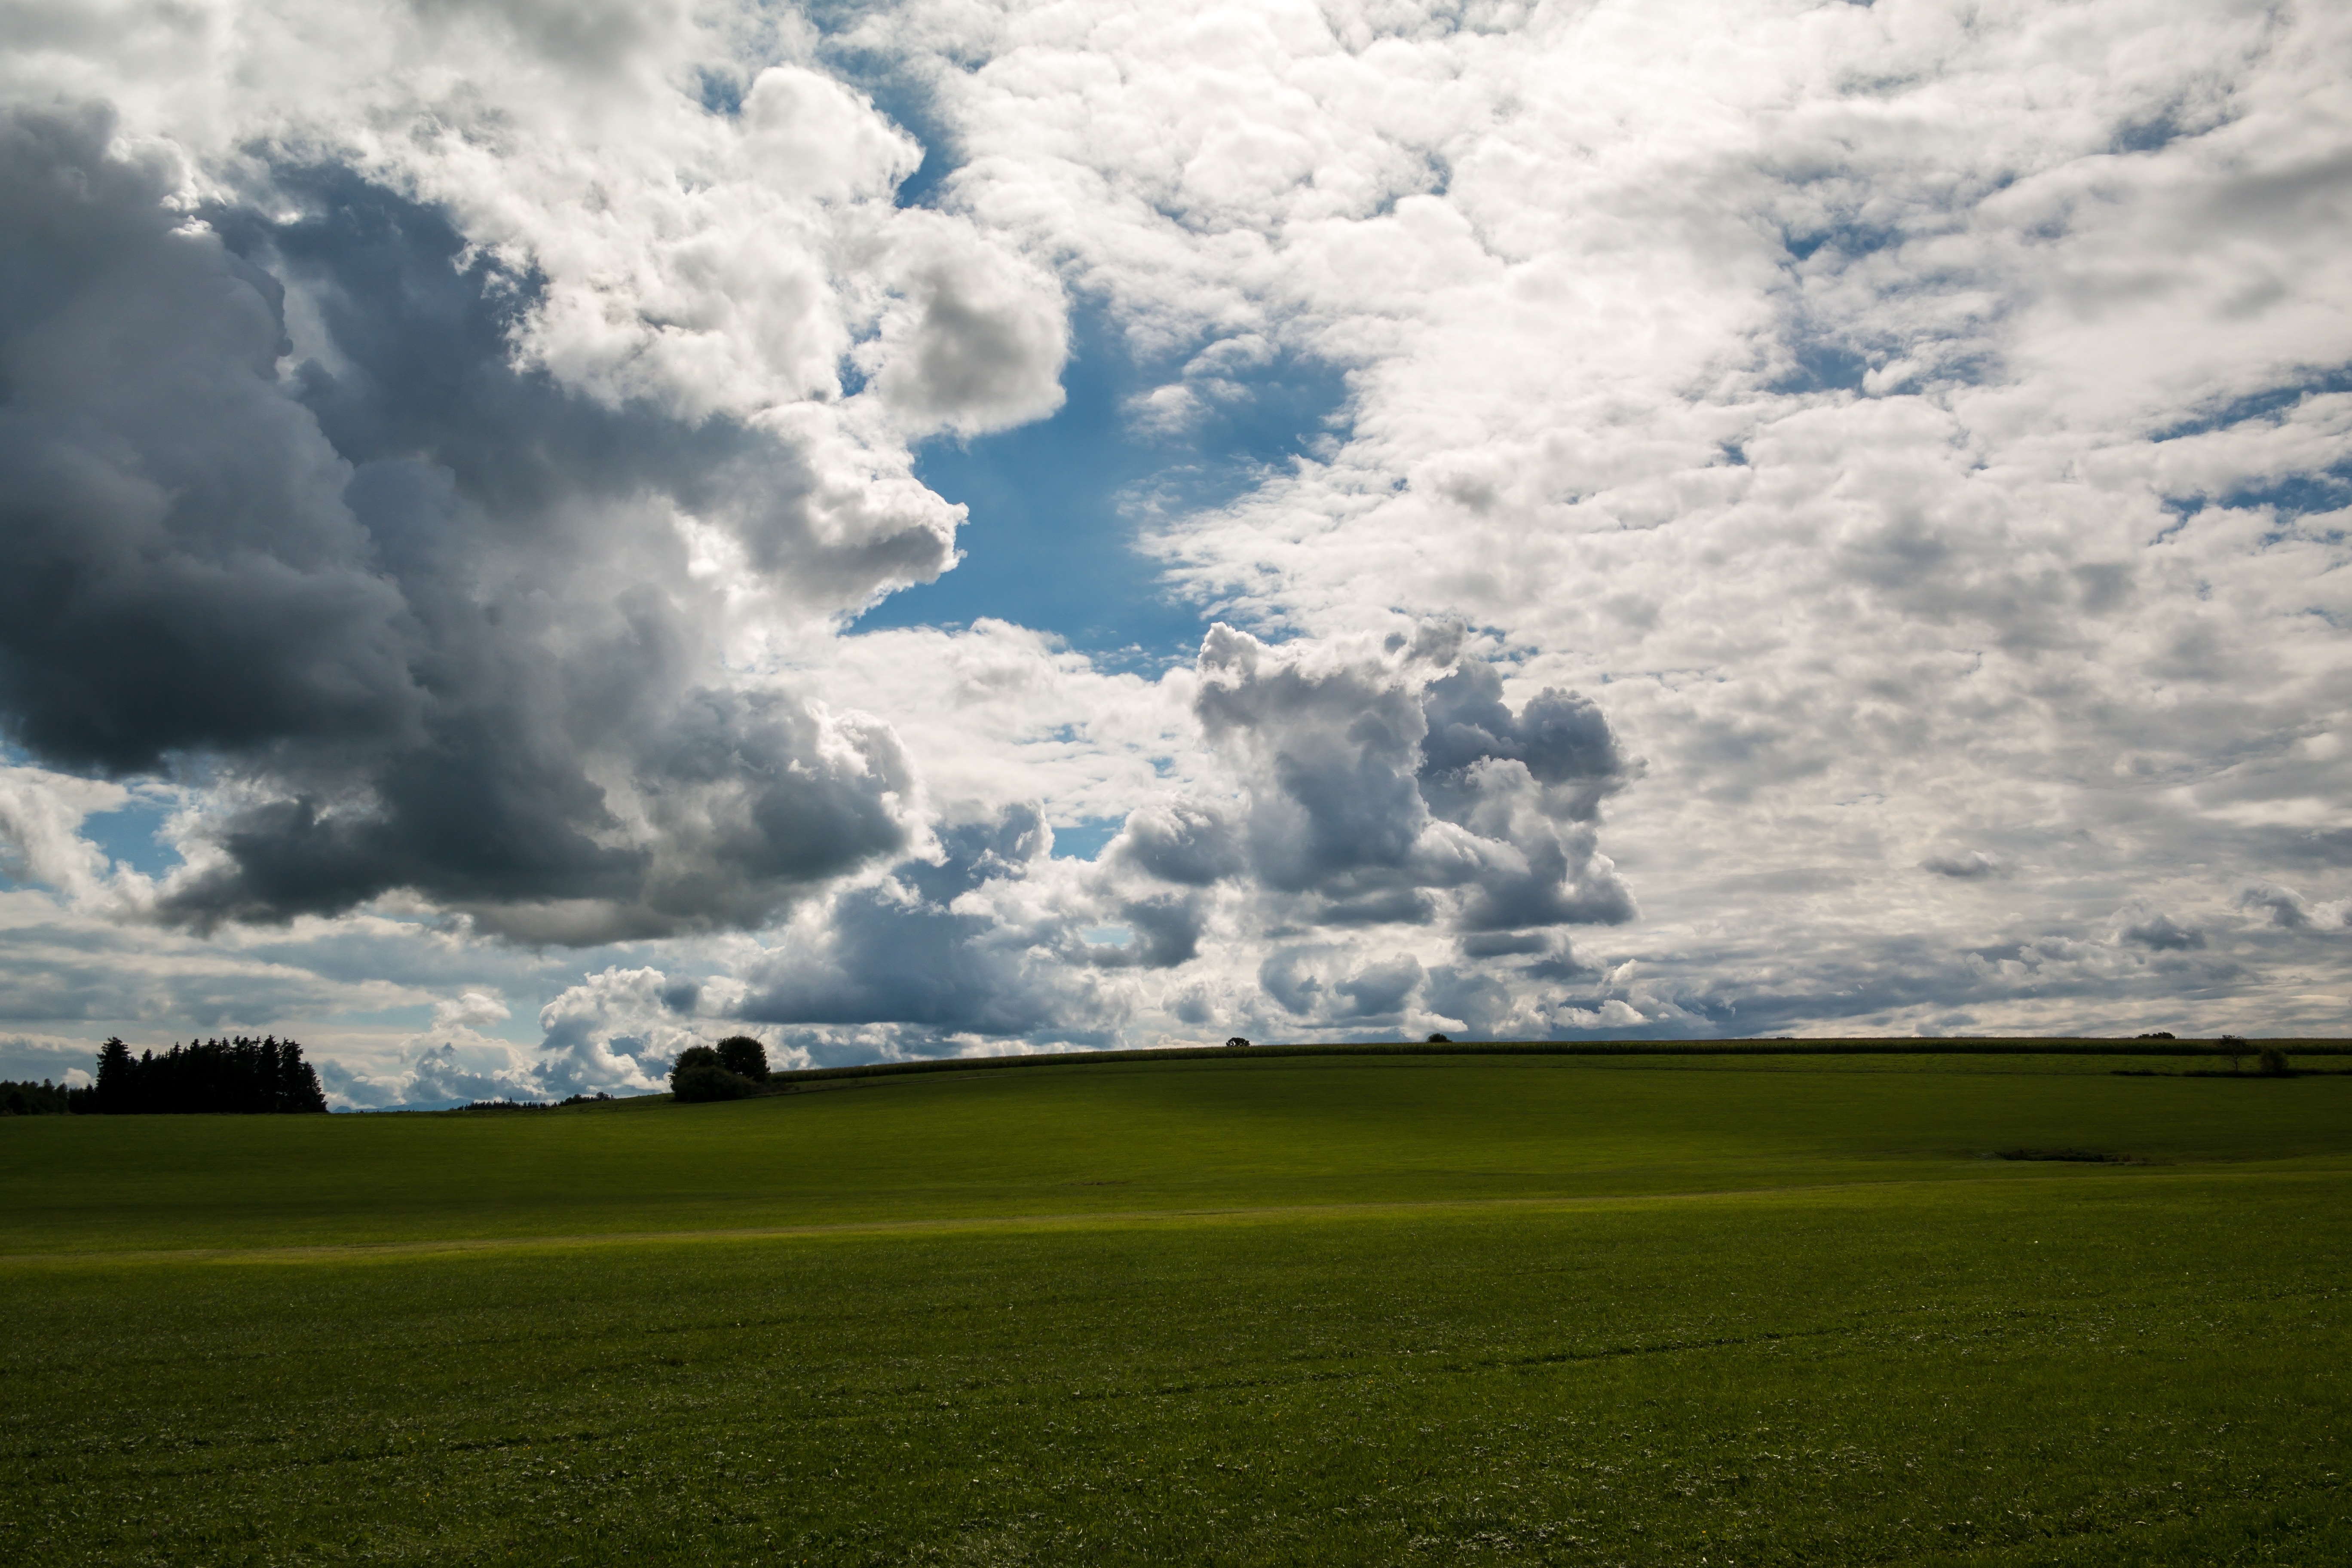 wide field under cloudy sky during daytime